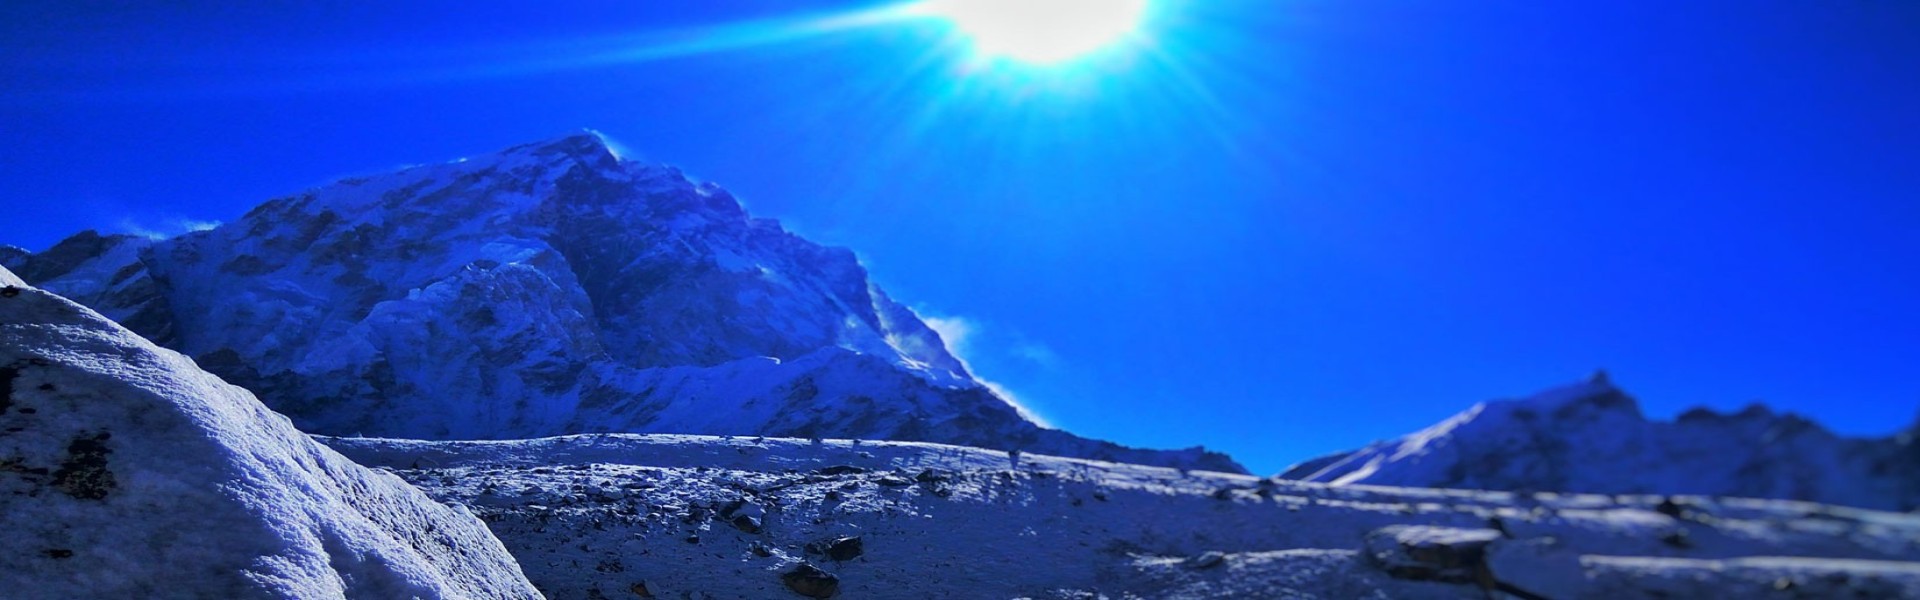 Everest Base Camp Trekking for Guide 2019 and 2020